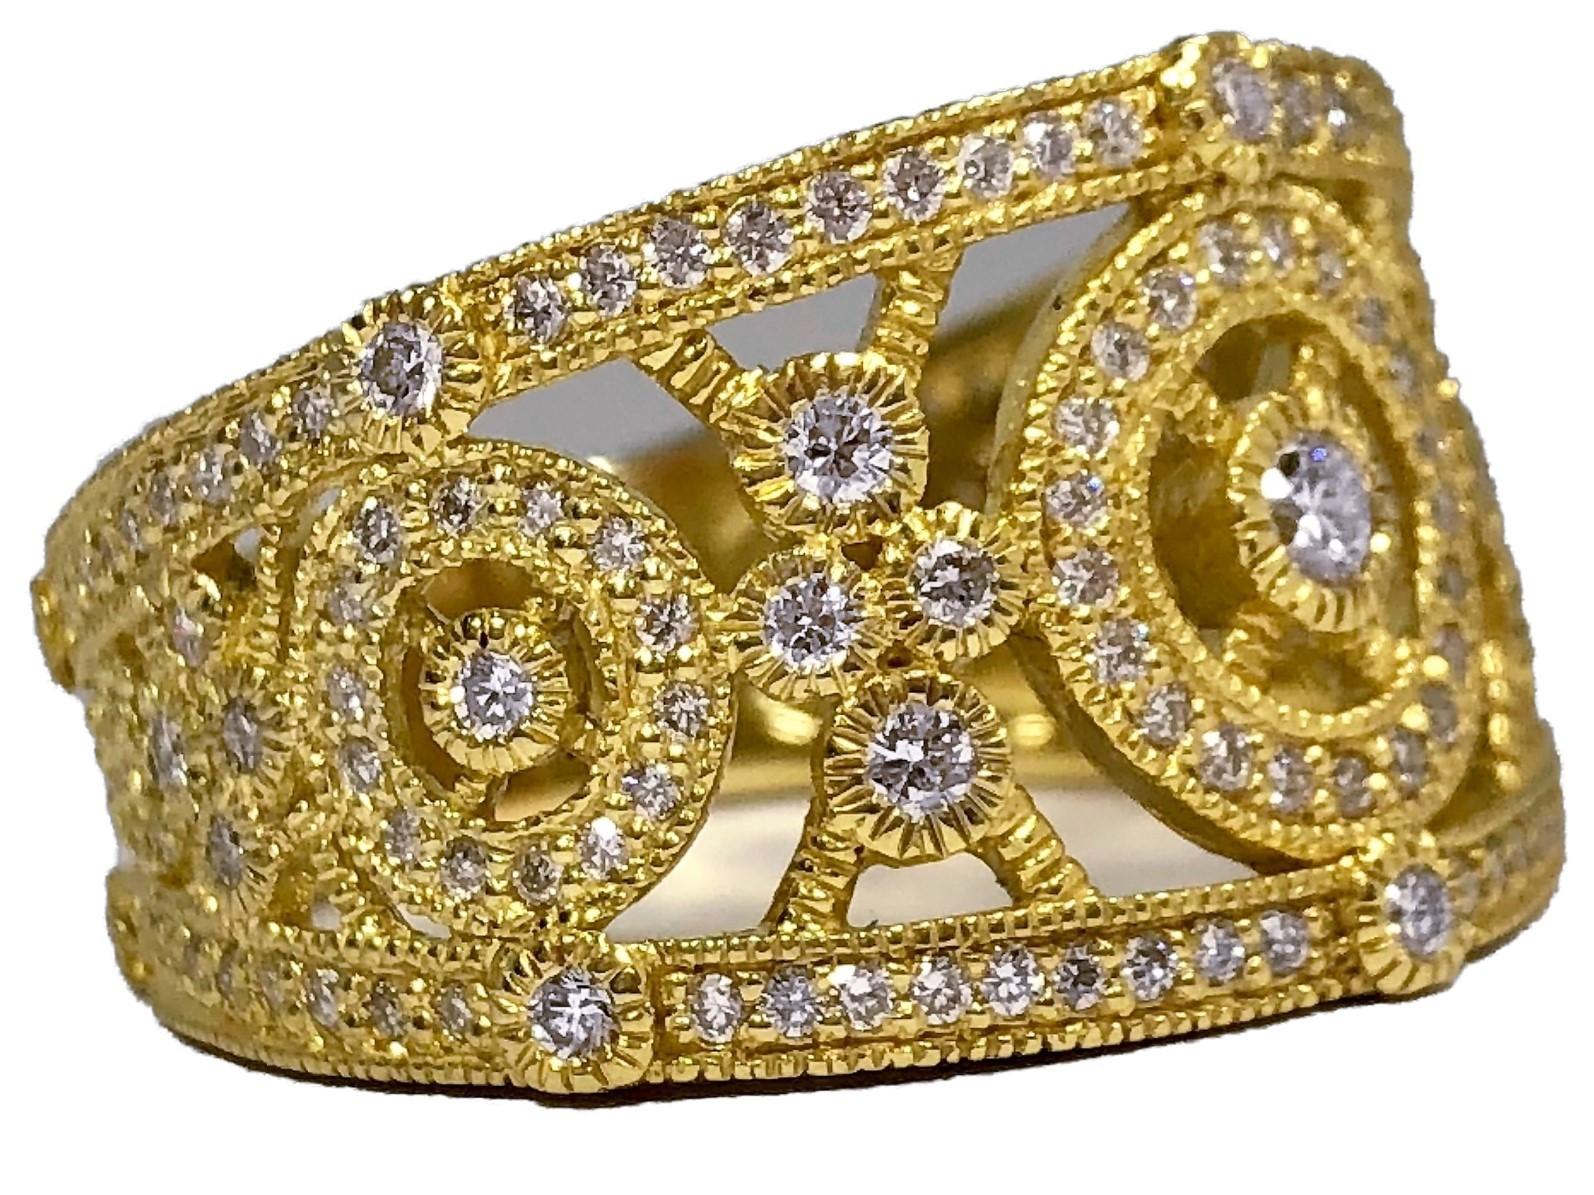 This classic Judith Ripka 18k yellow gold band ring is 5/8 inches wide at it's front and tapers gradually to 1/4 inches at the rear. It's set with over 100 round brilliant cut diamonds with a total approximate weight of 1.10ct and an overall quality